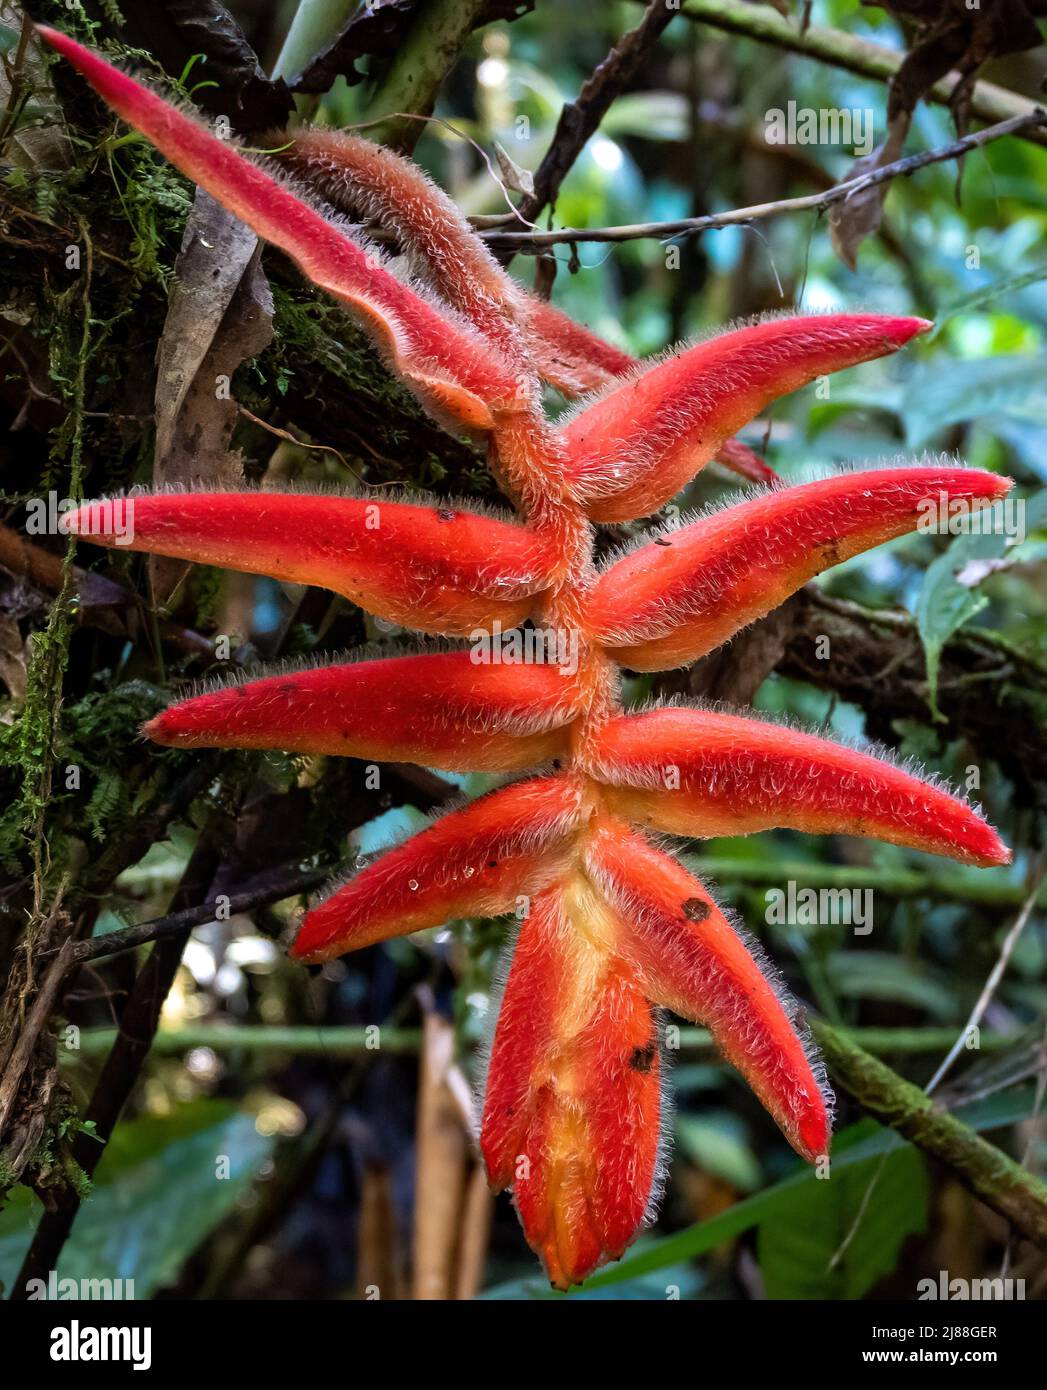 Flowers of fuzzy Heliconia (Heliconia vellerigera). Colombia, South America. Stock Photo